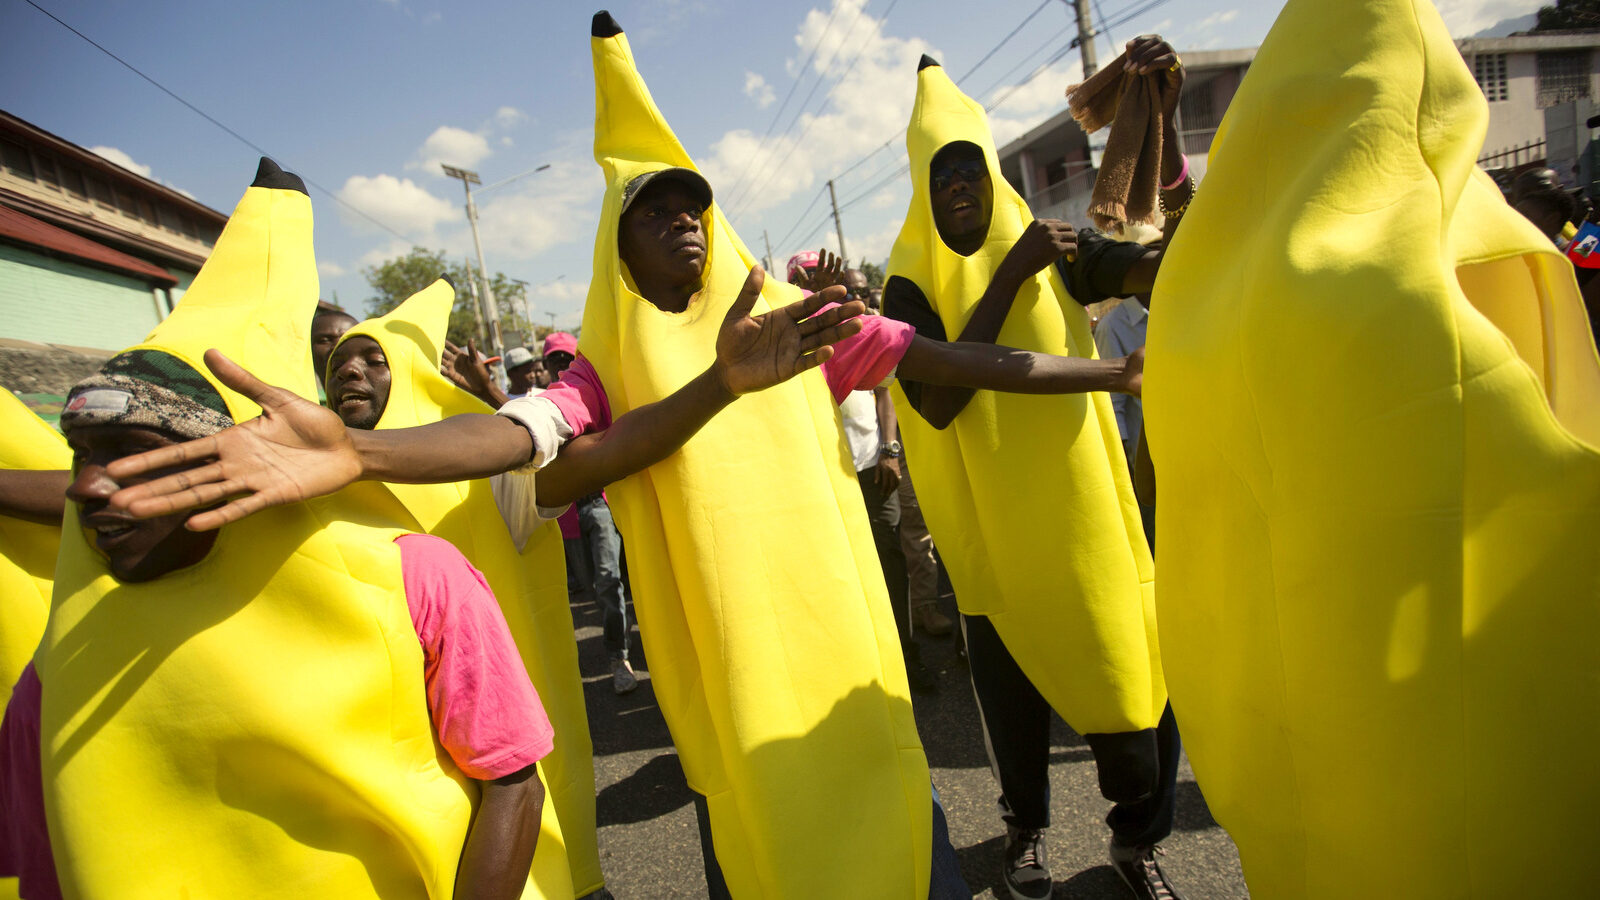 Haitians dressed as bananas to show their support for organic banana farmer and presidential candidate Jovenel Moise, from the PHTK party, march to demand elections be reinstated, in Port-au-Prince, Haiti, Tuesday, Feb. 2, 2016. Haiti had been scheduled to hold a presidential and legislative runoff Jan. 24. But the now-splintered provisional electoral council canceled it for a second time amid the protests and suspicion that the first round was marred by widespread fraud favoring Moise, President Michel Martelly's chosen candidate. (AP Photo/Dieu Nalio Chery)